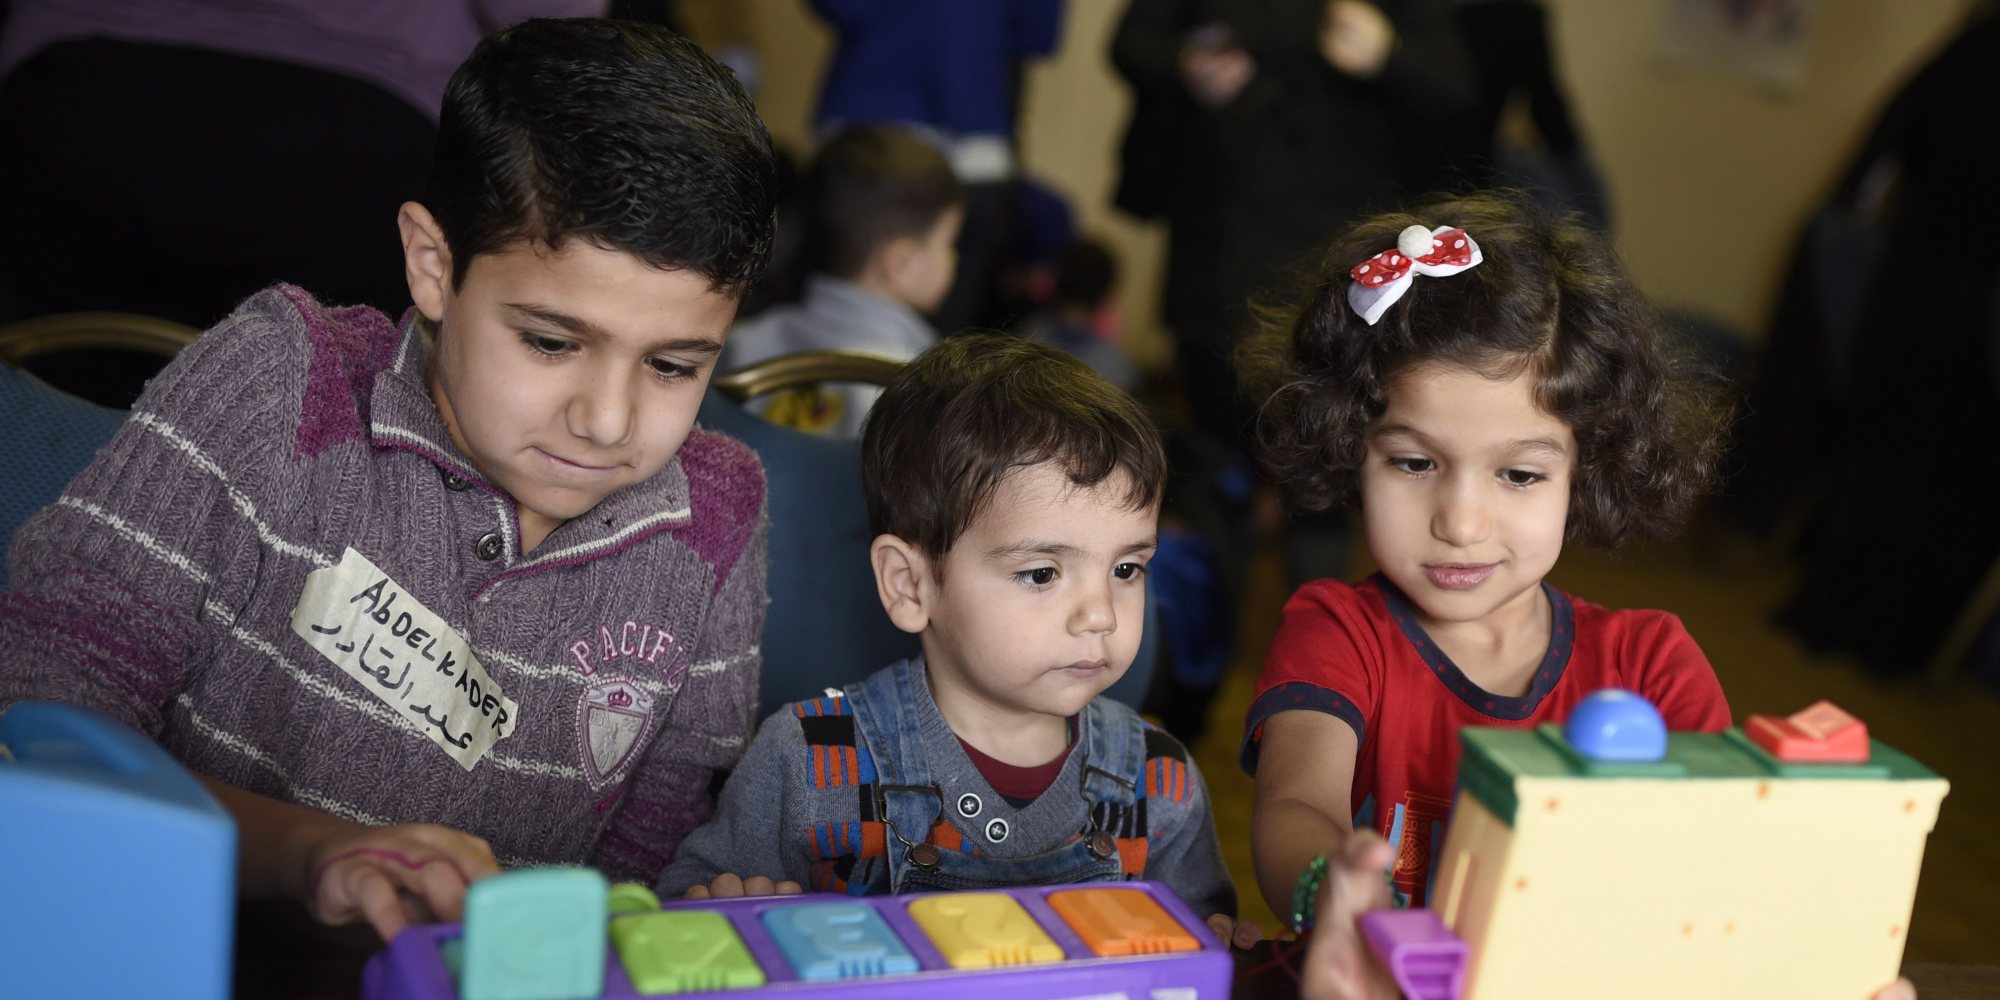 Syrian Refugees Canada: Kids Attend Play Groups While They Wait For New ...